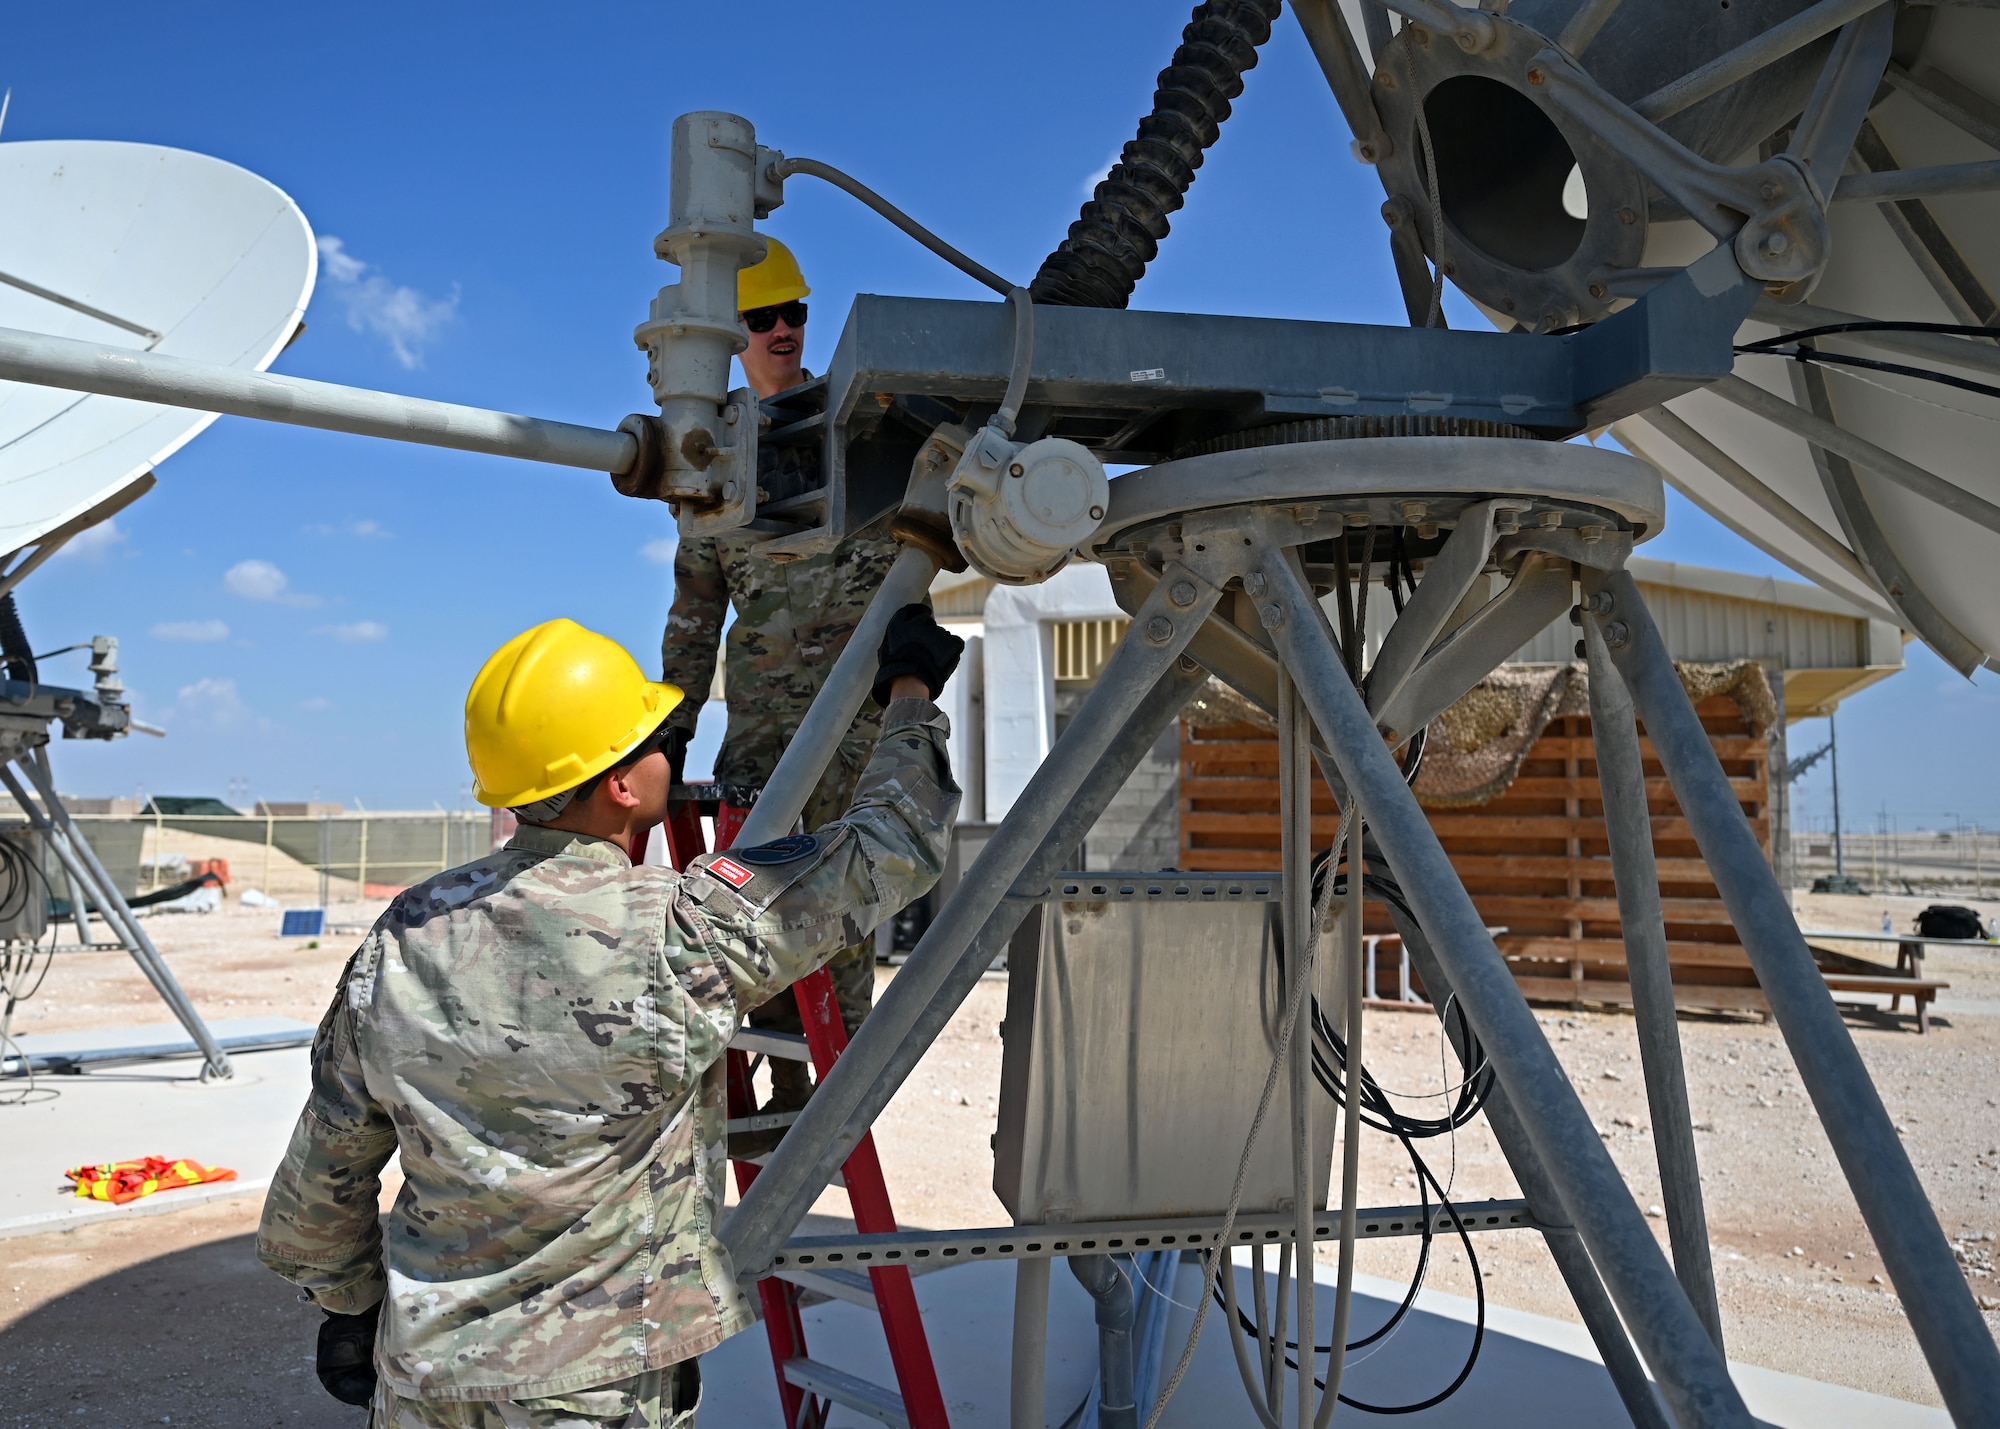 U.S. Space Force Capt. Steven Torres, left, 5th Space Warning Squadron Detachment 2 commander, and U.S. Space Force Sgt. Mitchell Swanson, right, 5th SWS Detachment 2 systems evaluator, inspect a ground antenna at an undisclosed location in the U.S Central Command area of responsibility, Oct. 27, 2023. Detachment 2 is one of four geographically separated units placed across the U.S. European Command, U.S. Central Command, and the U.S. Indo-Pacific Command acting as the eyes and ears for the U.S. military. (U.S. Air Force photo by Senior Airman Sarah Williams)